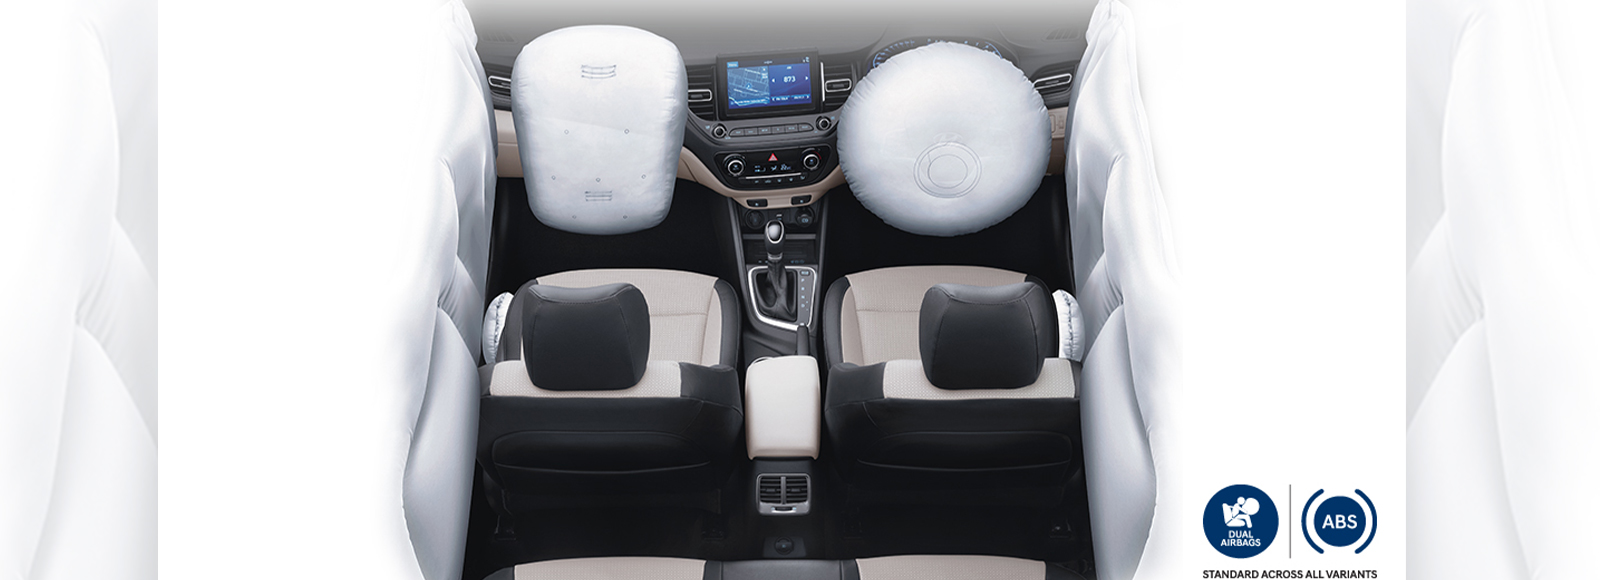 Standardized Dual Front SRS Airbags